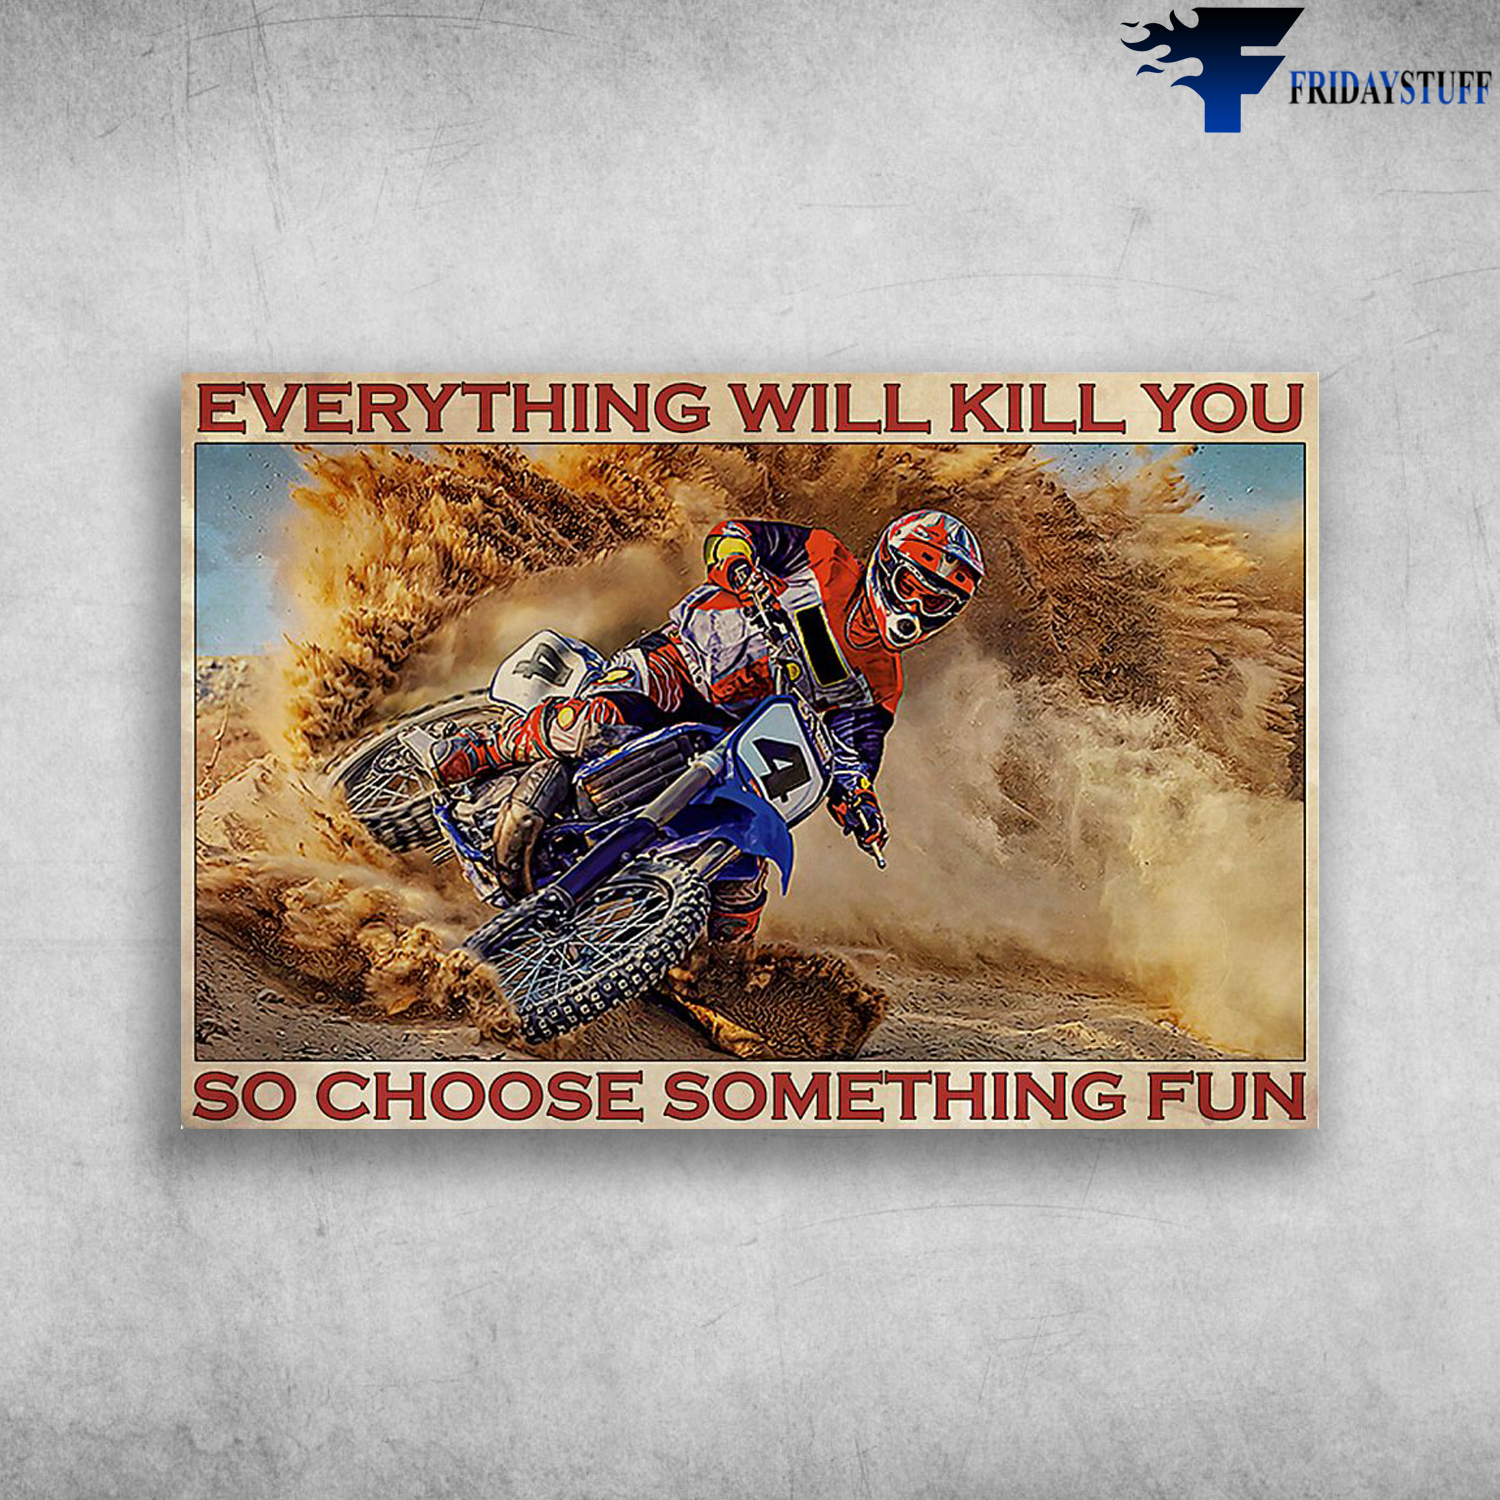 The Man Is Riding Motorcycle On Sand - Everything Will Kil You So Choose Something Fun